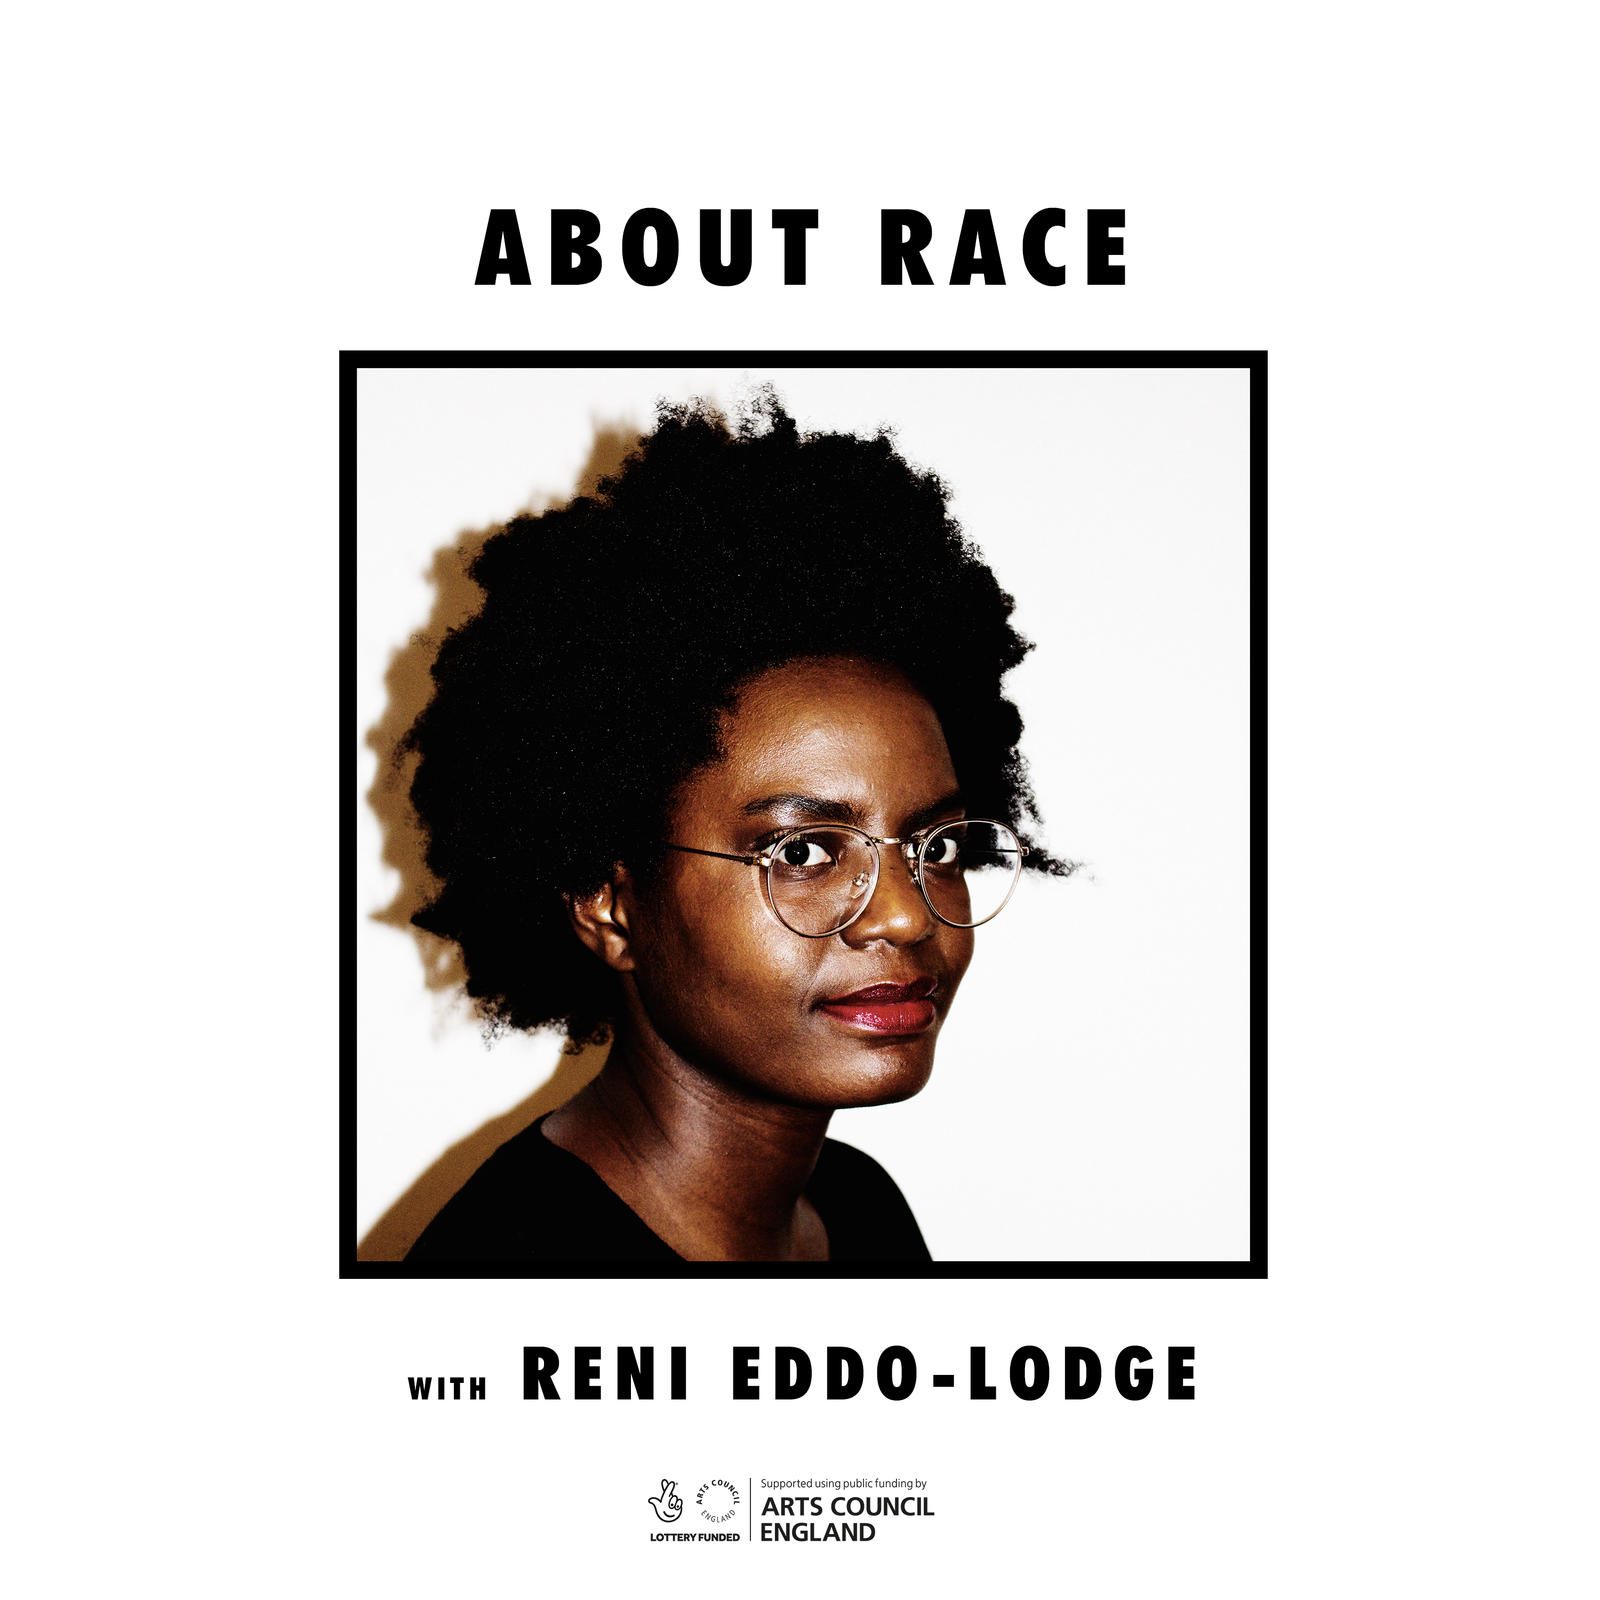 1) About Race with Reni Eddo-Lodge